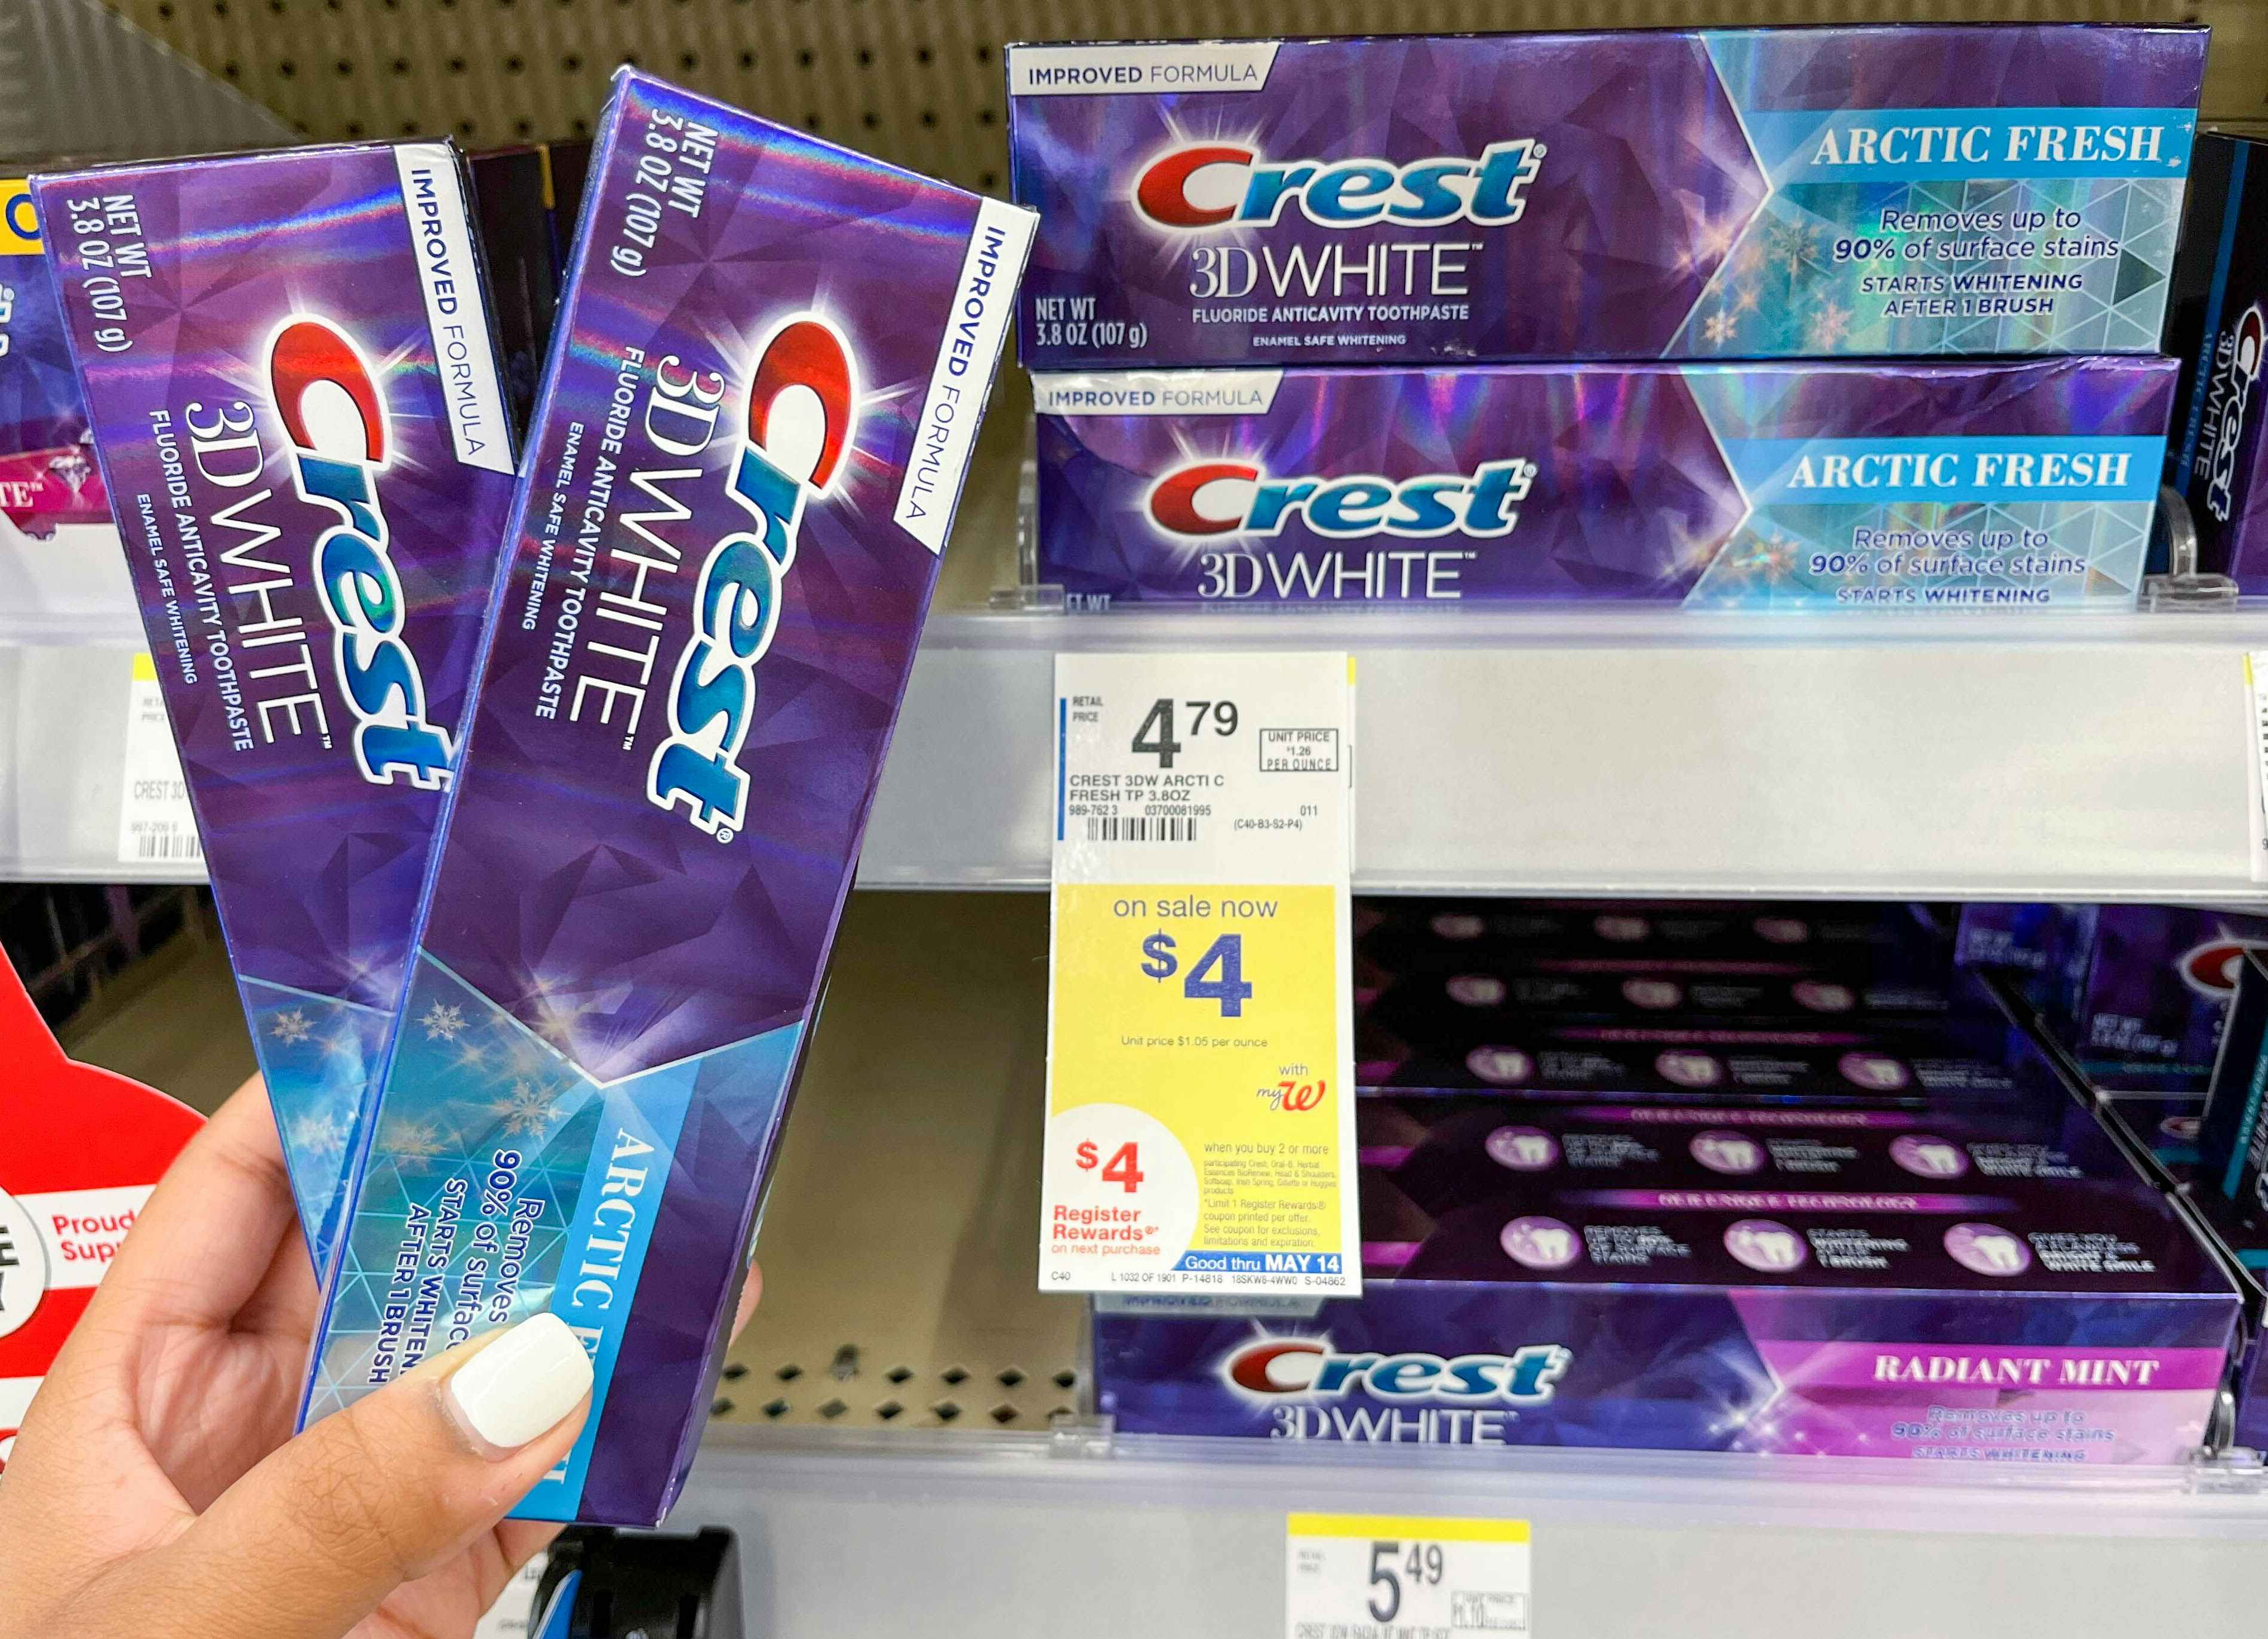 A person's hand holding two boxes of Crest toothpaste next to a sale tag at Walgreens.